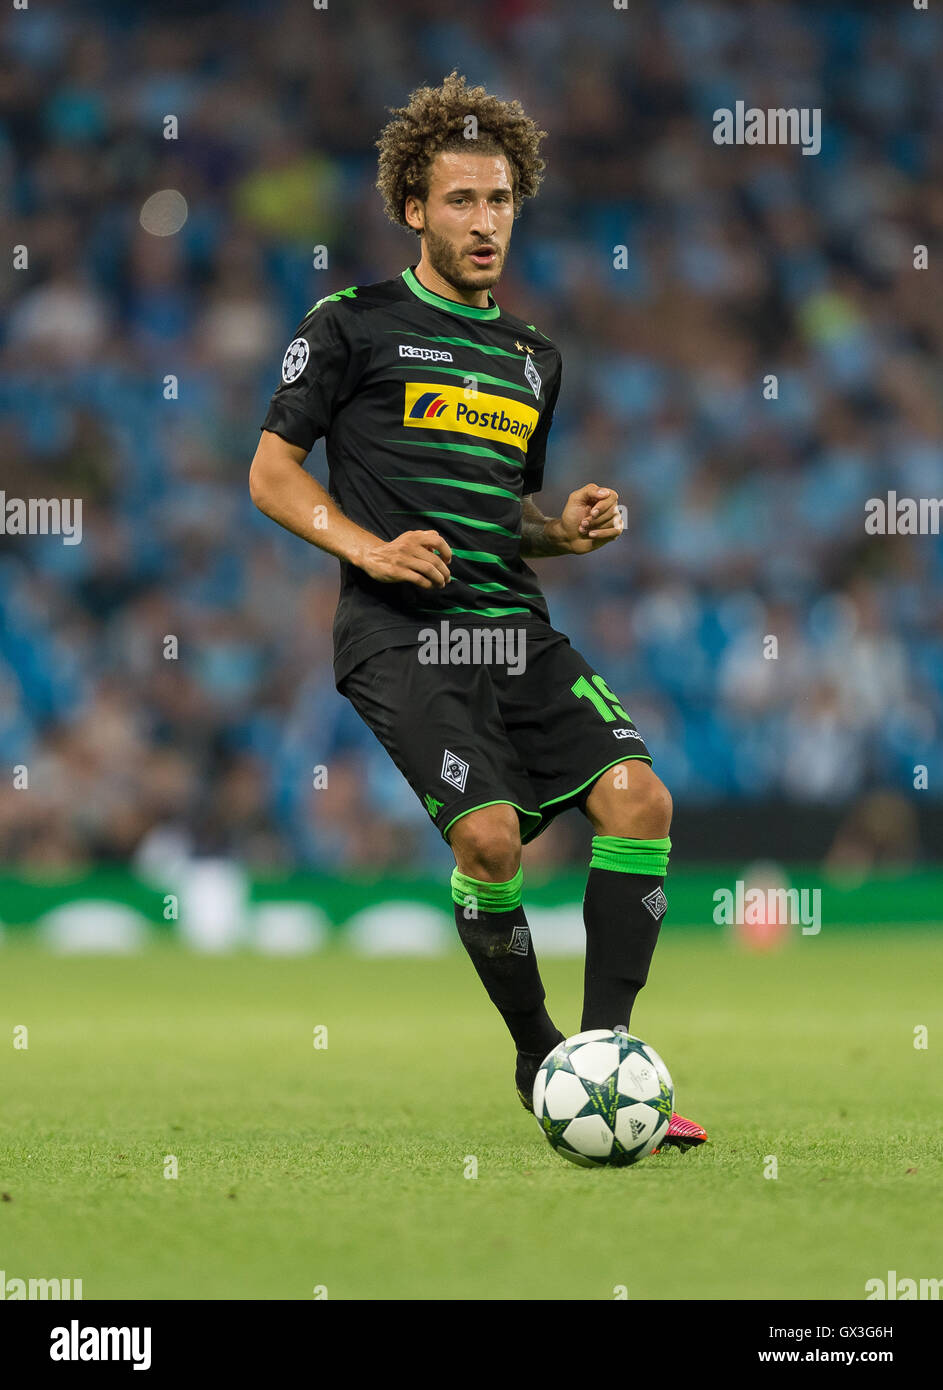 Manchester, UK. 14th Sep, 2016. Gladbach's Fabian Johnson in action during the Champions League group stage football match between Manchester City and Borussia Moenchengladbach at the Etihad Stadium in Manchester, UK, 14 September 2016. PHOTO: GUIDO KIRCHNER/DPA/Alamy Live News Stock Photo